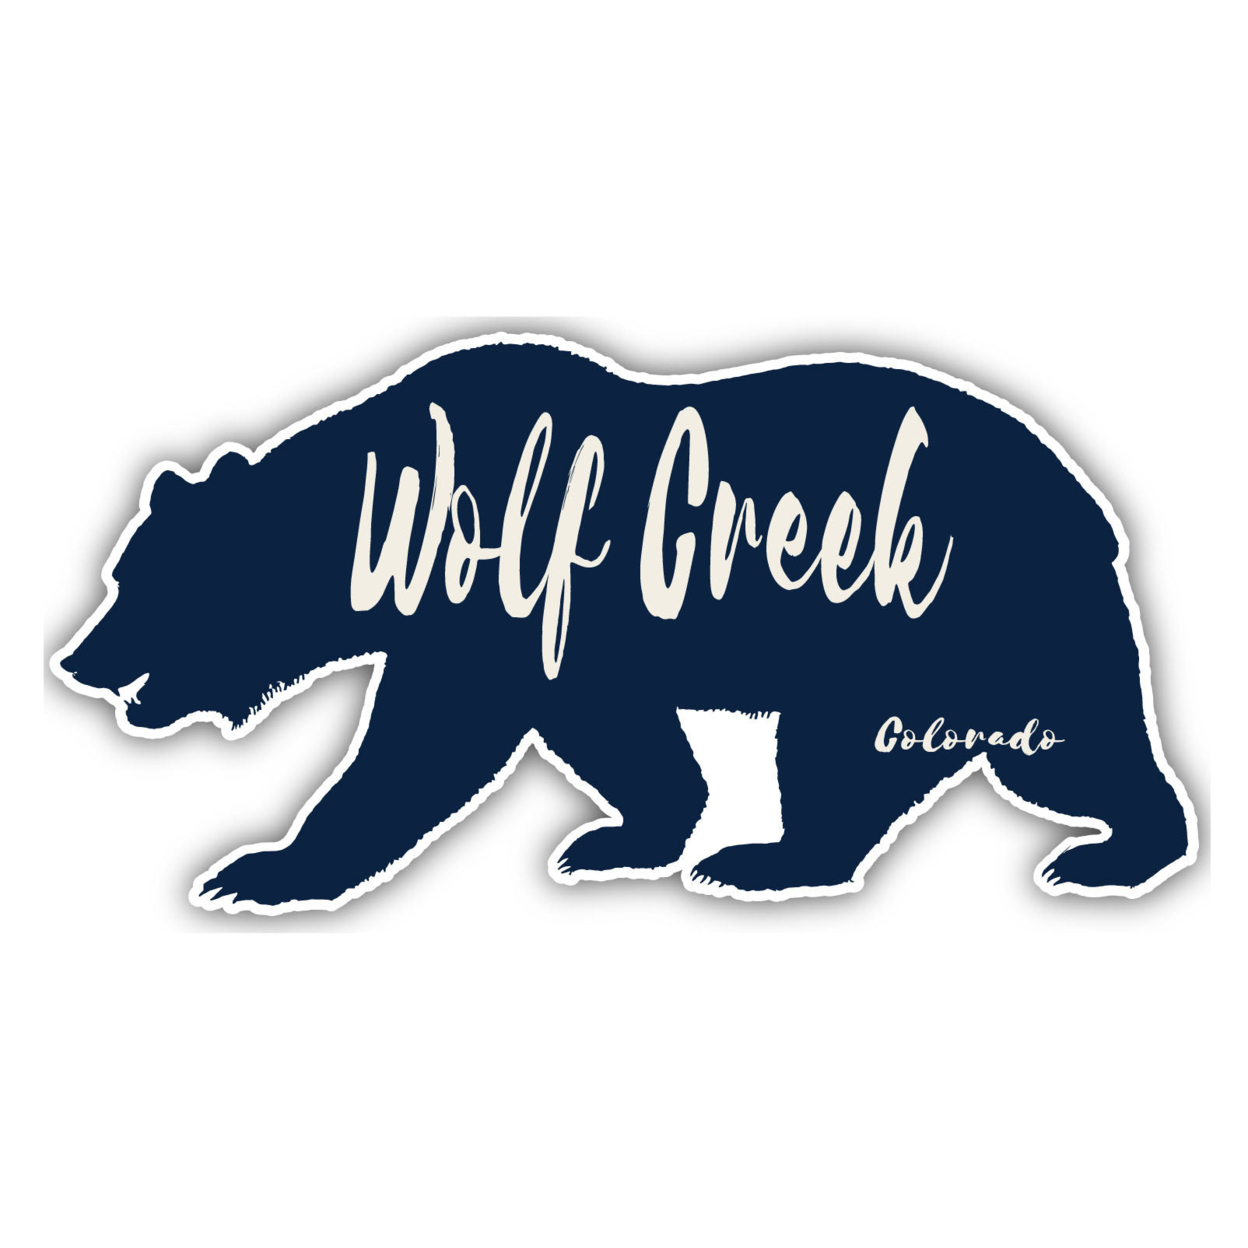 Wolf Creek Colorado Souvenir Decorative Stickers (Choose Theme And Size) - Single Unit, 2-Inch, Great Outdoors